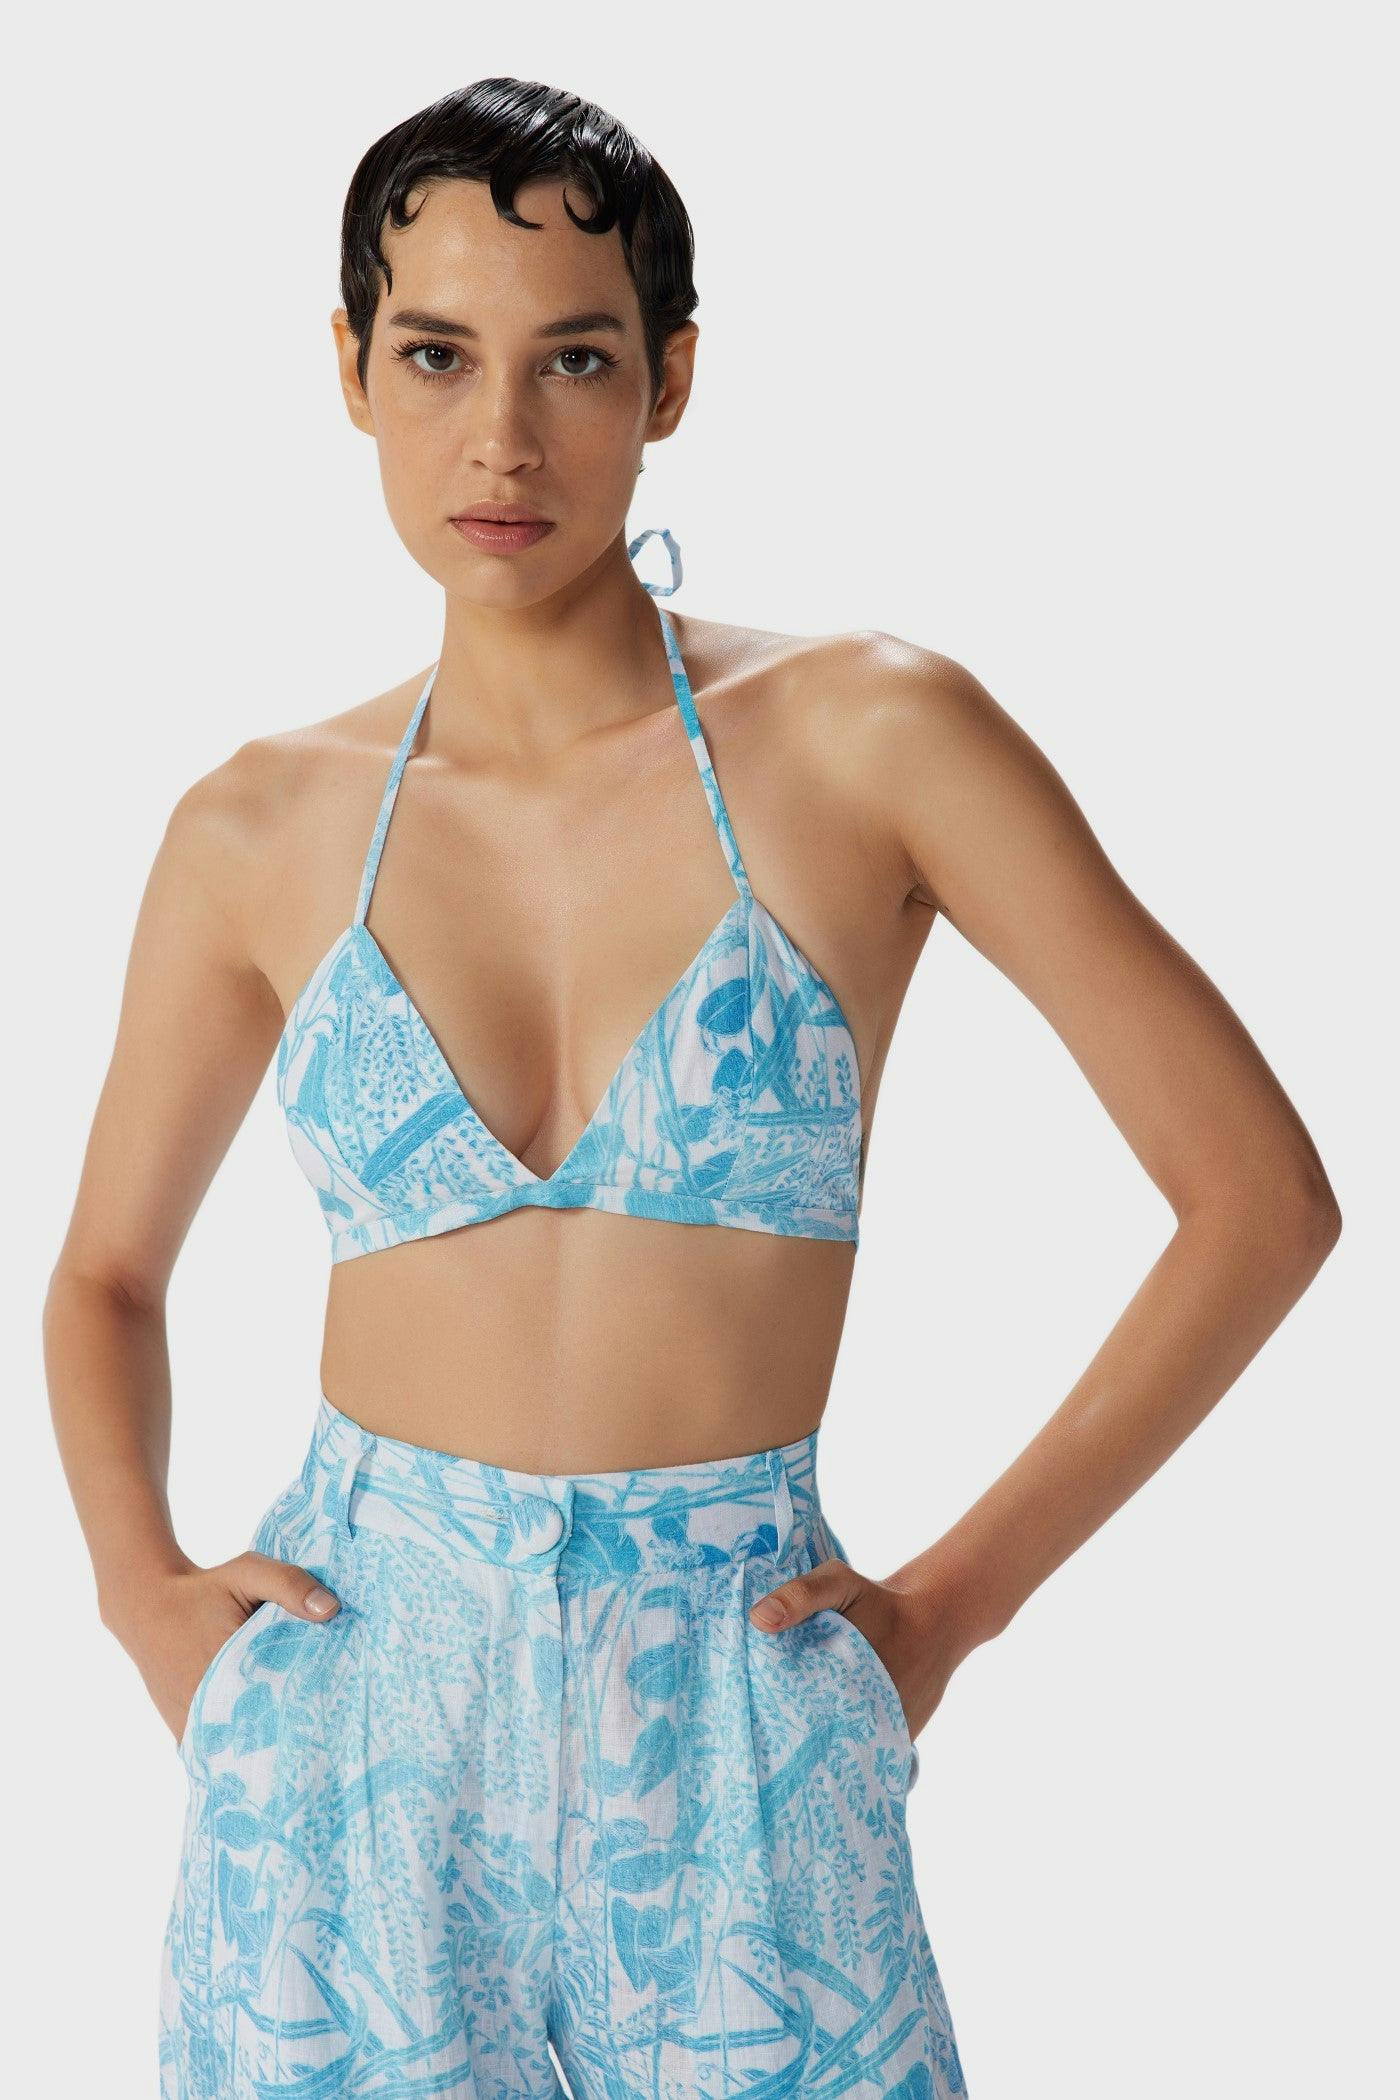 Tal Bralette, a product by THE IASO